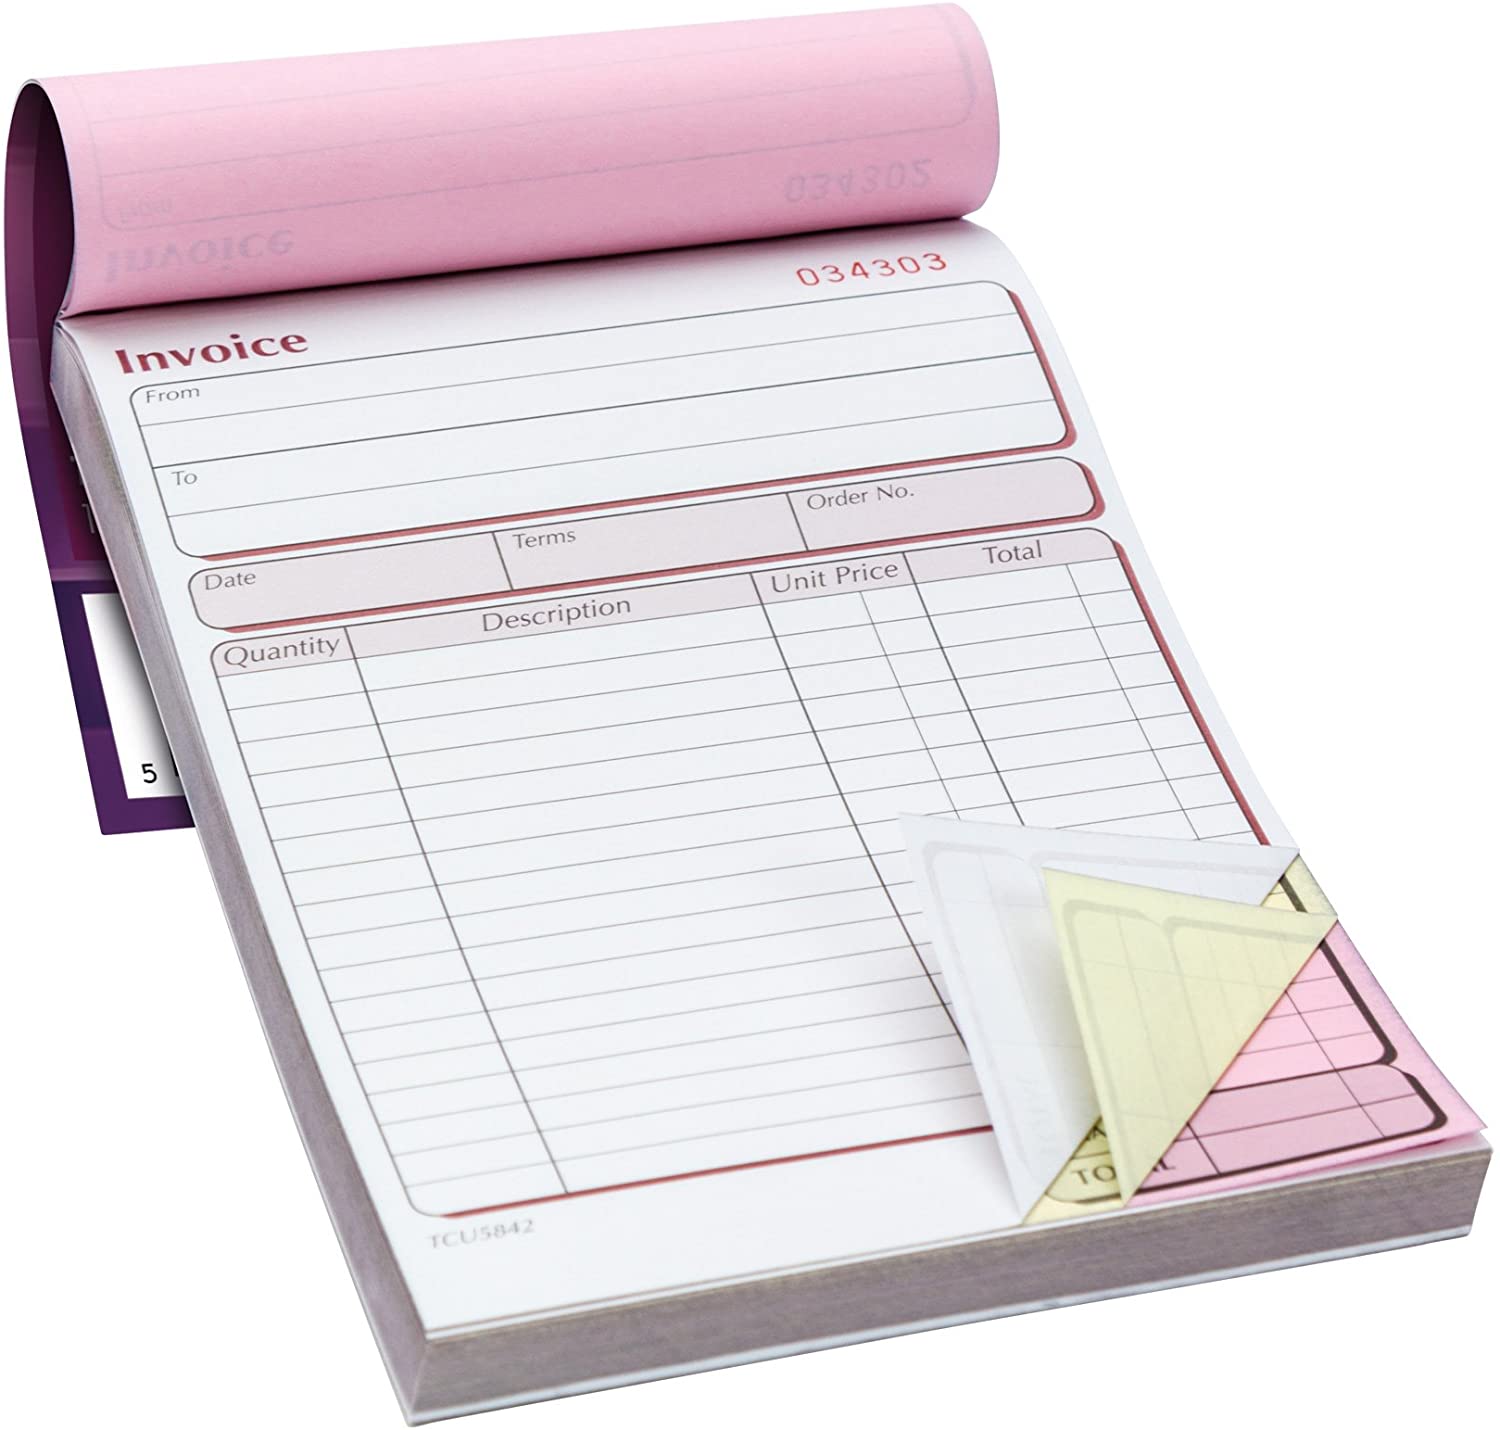 Invoice / Receipt Books Branding Printing Solutions Company in